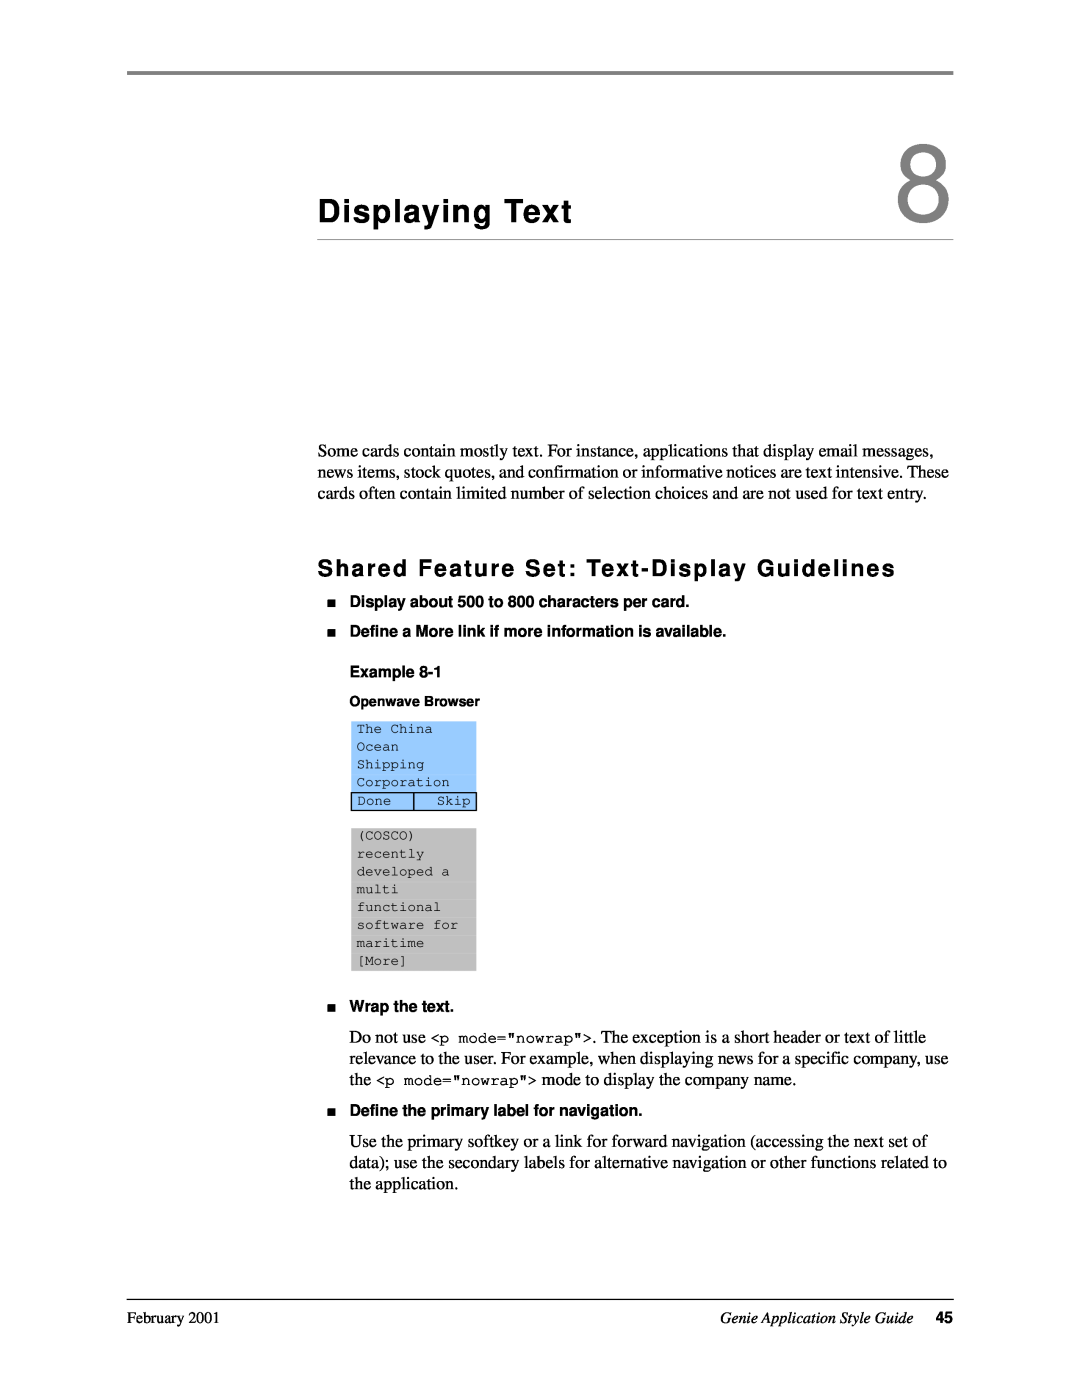 Genie 7110 manual Displaying Text, Shared Feature Set Text - Display Guidelines 